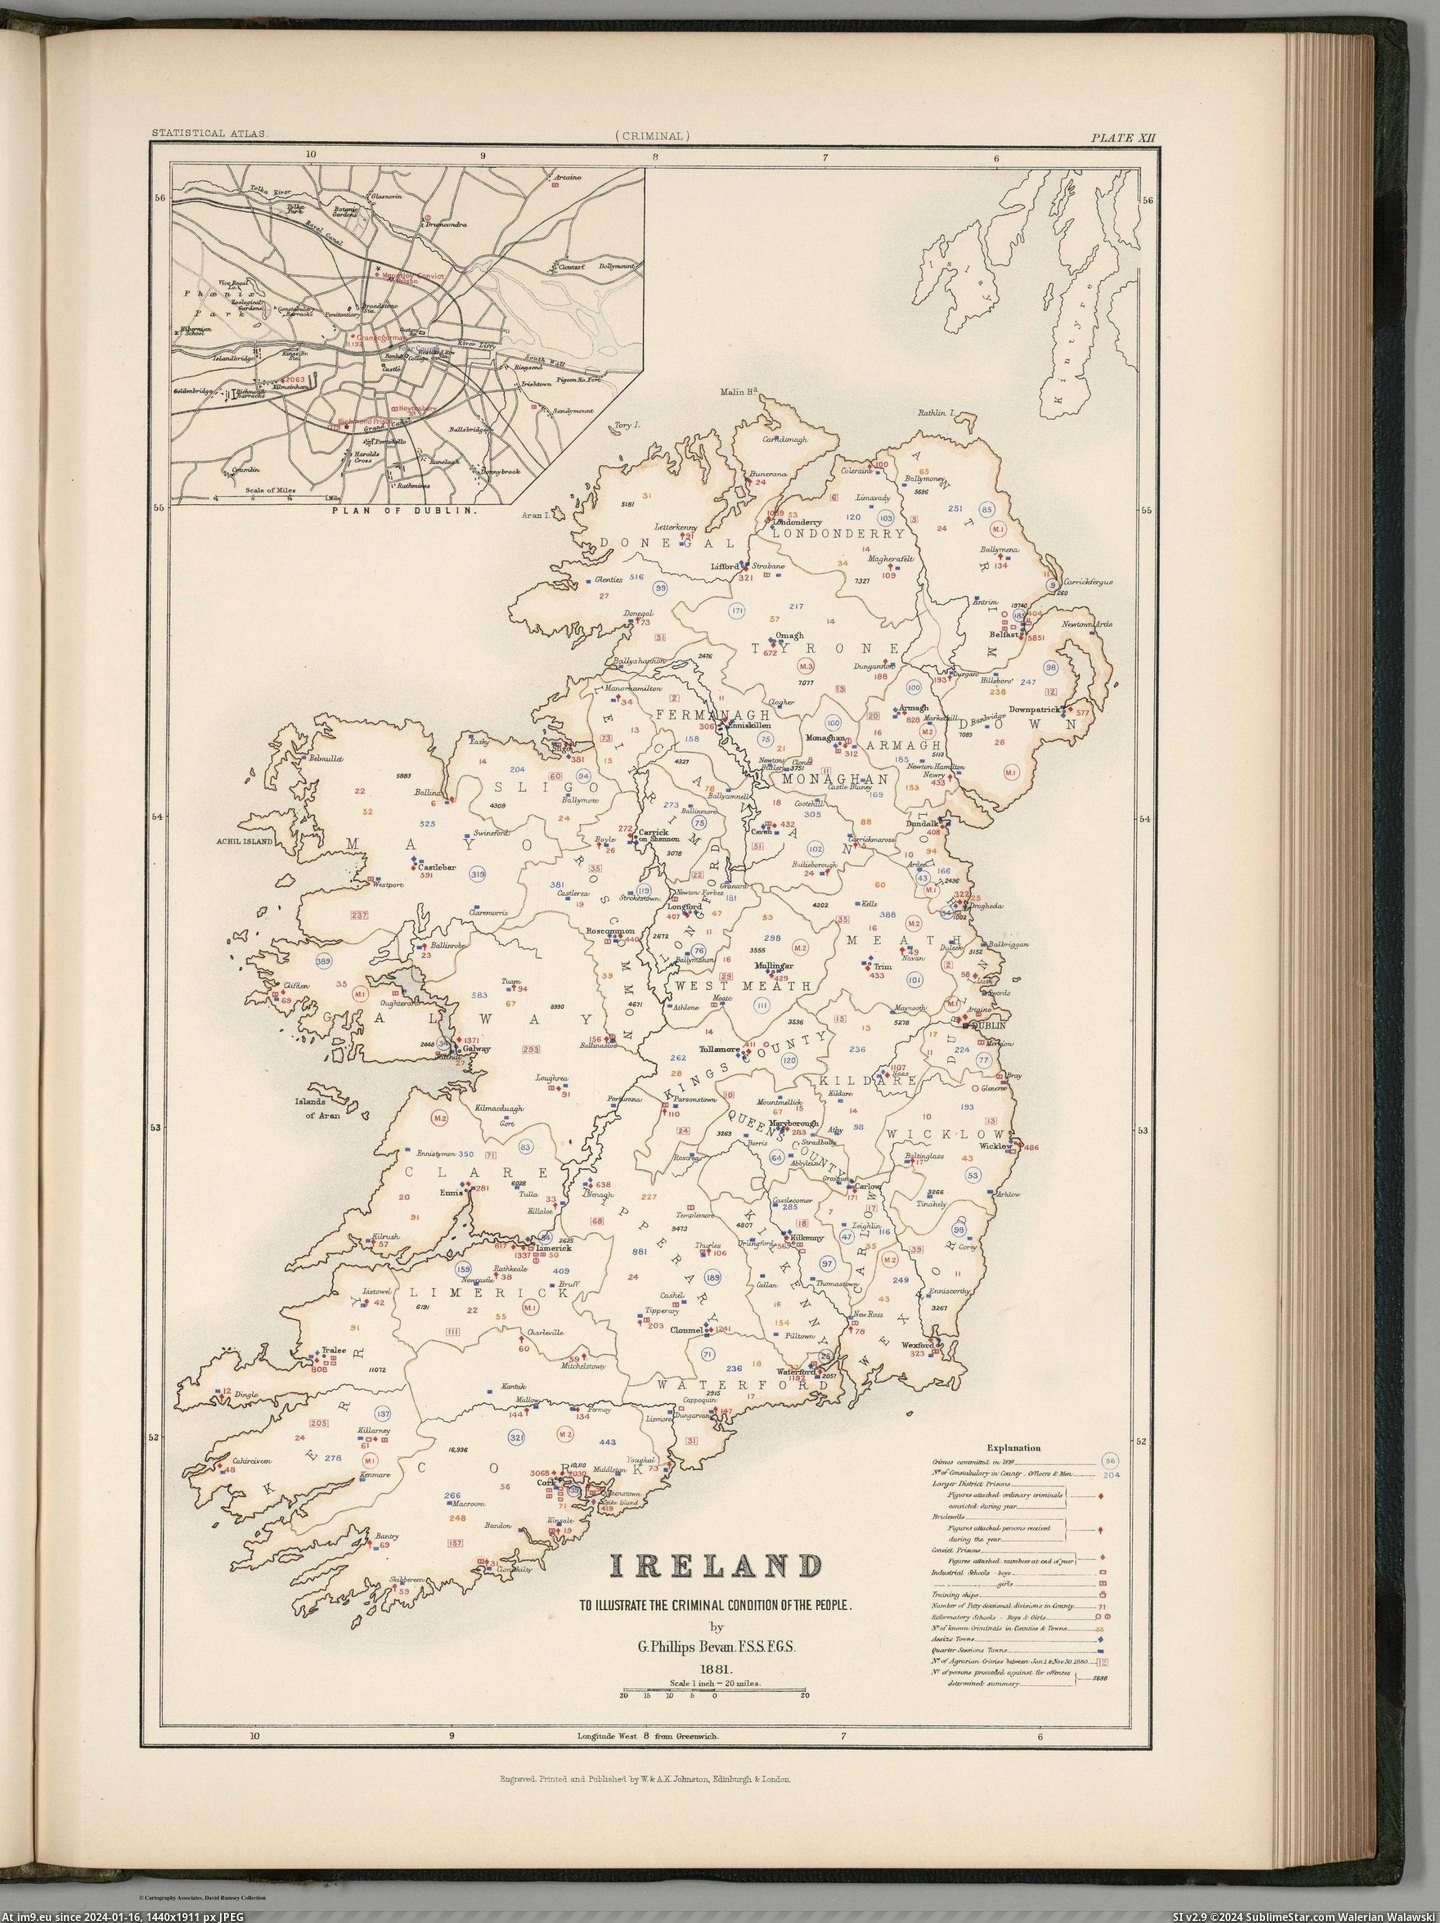 #People #Condition #Ireland [Mapporn] 'The Criminal Condition of the People' of Ireland ca. 1881 [2307x3704] Pic. (Image of album My r/MAPS favs))